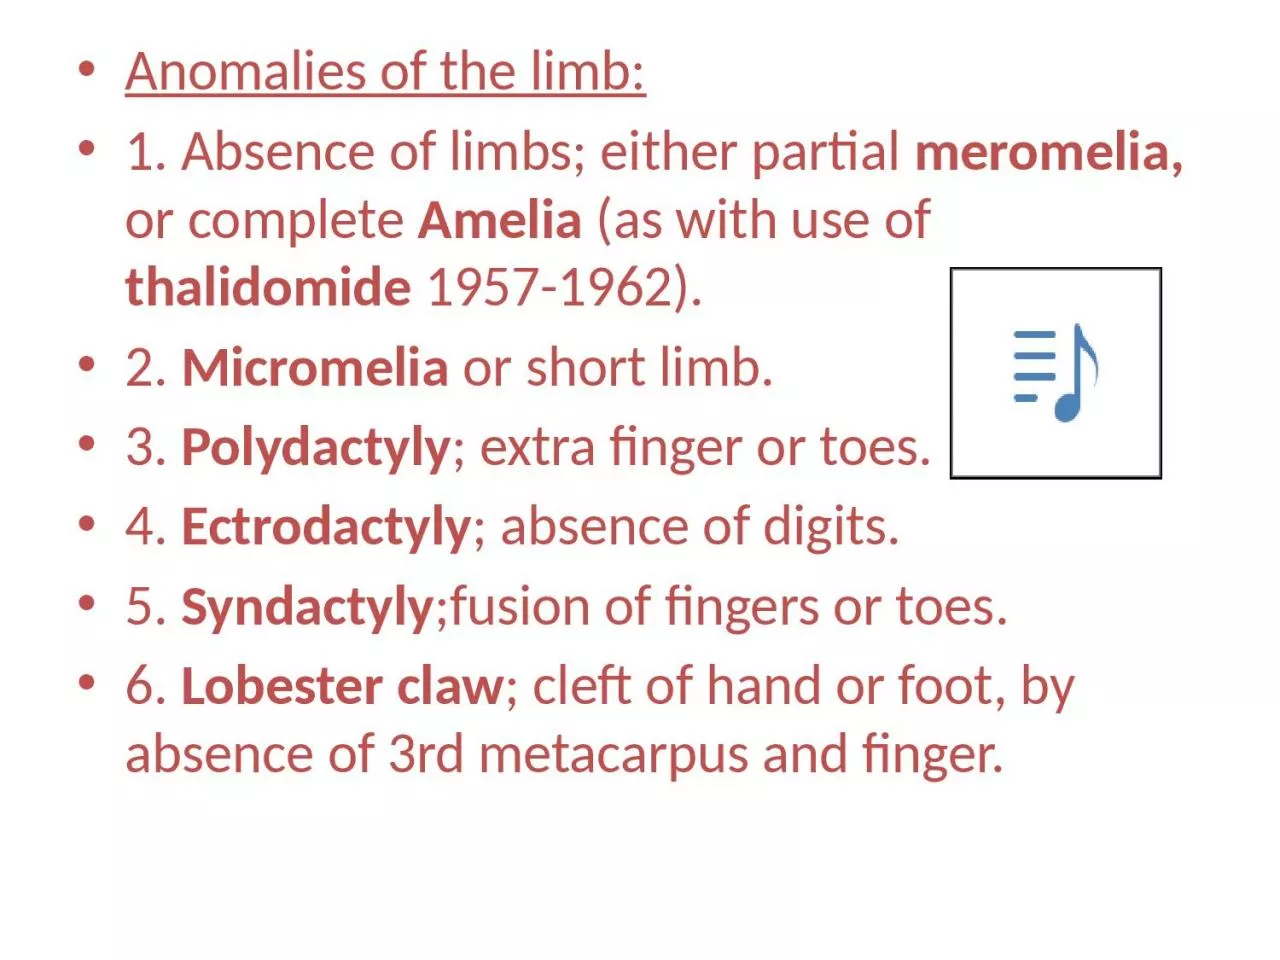 Anomalies of the limb: 1. Absence of limbs; either partial